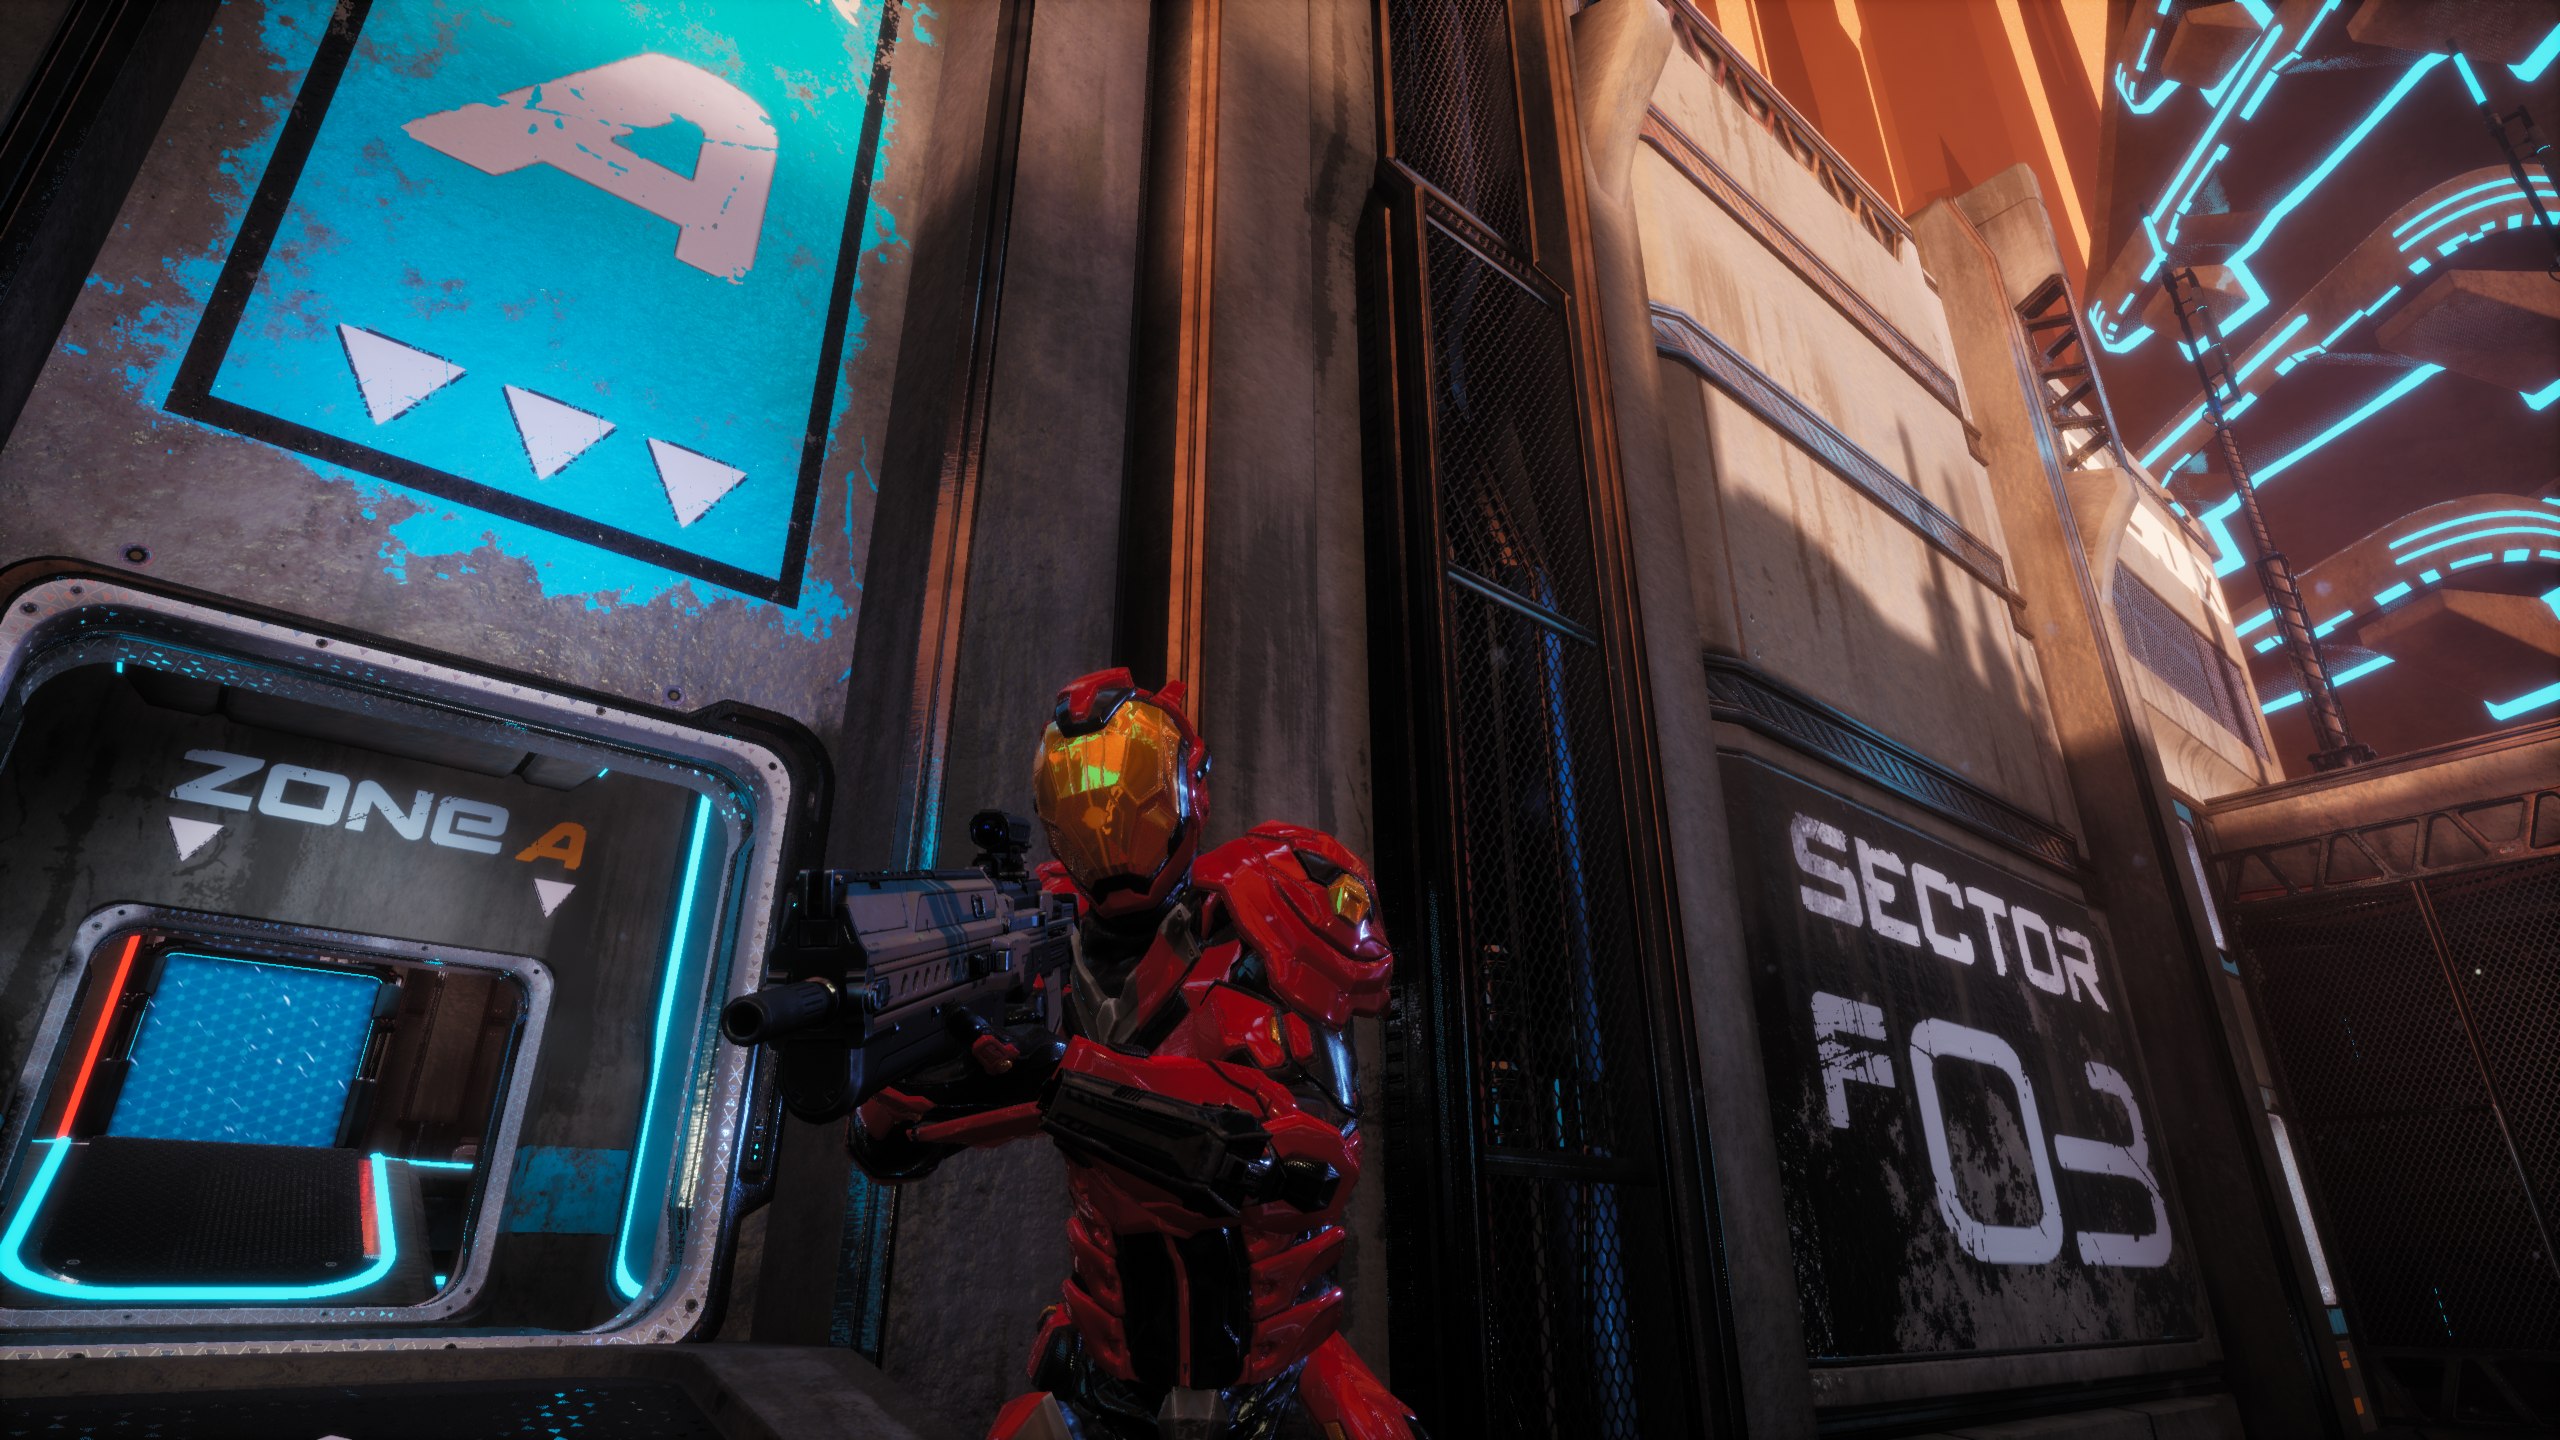 Splitgate Open Beta Becomes So Popular That Servers Fill to Capacity